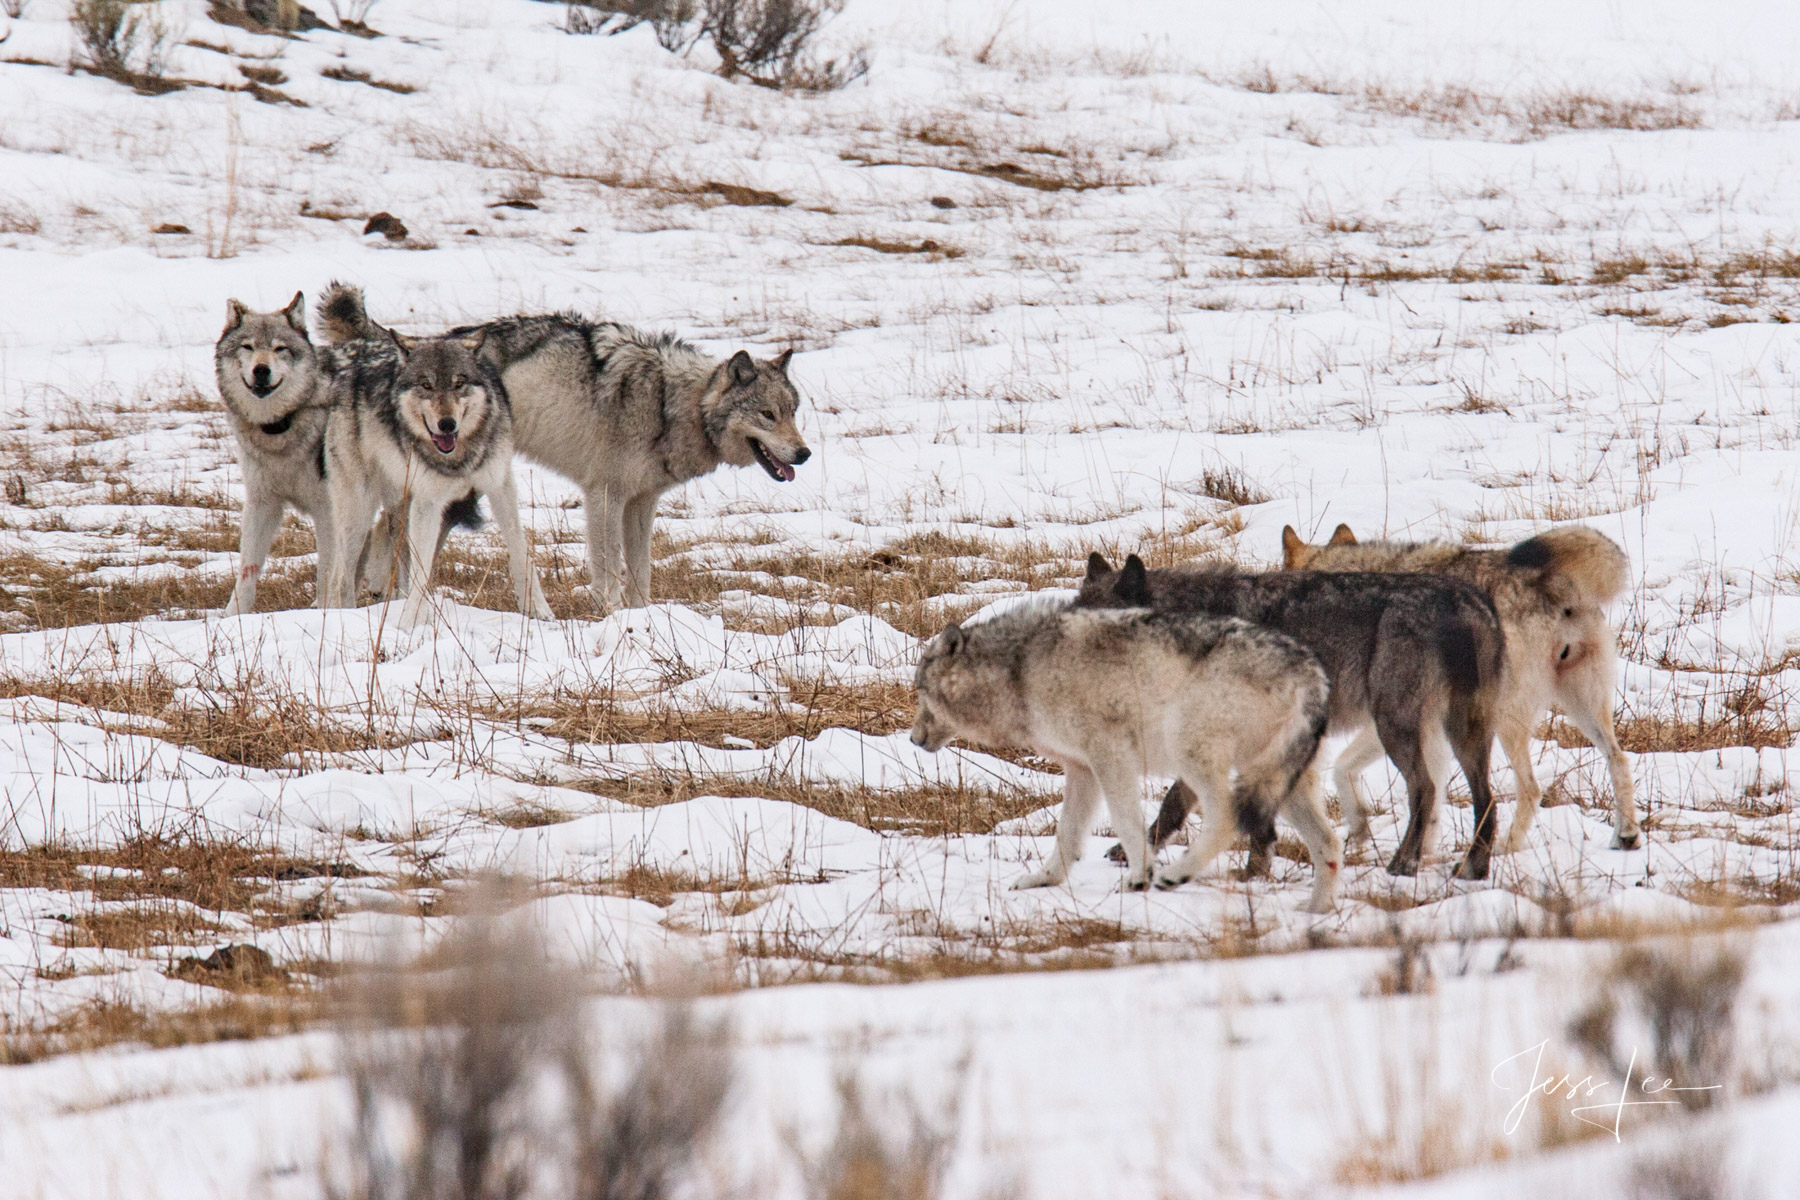 two packs of wolves facing off during breeding season.